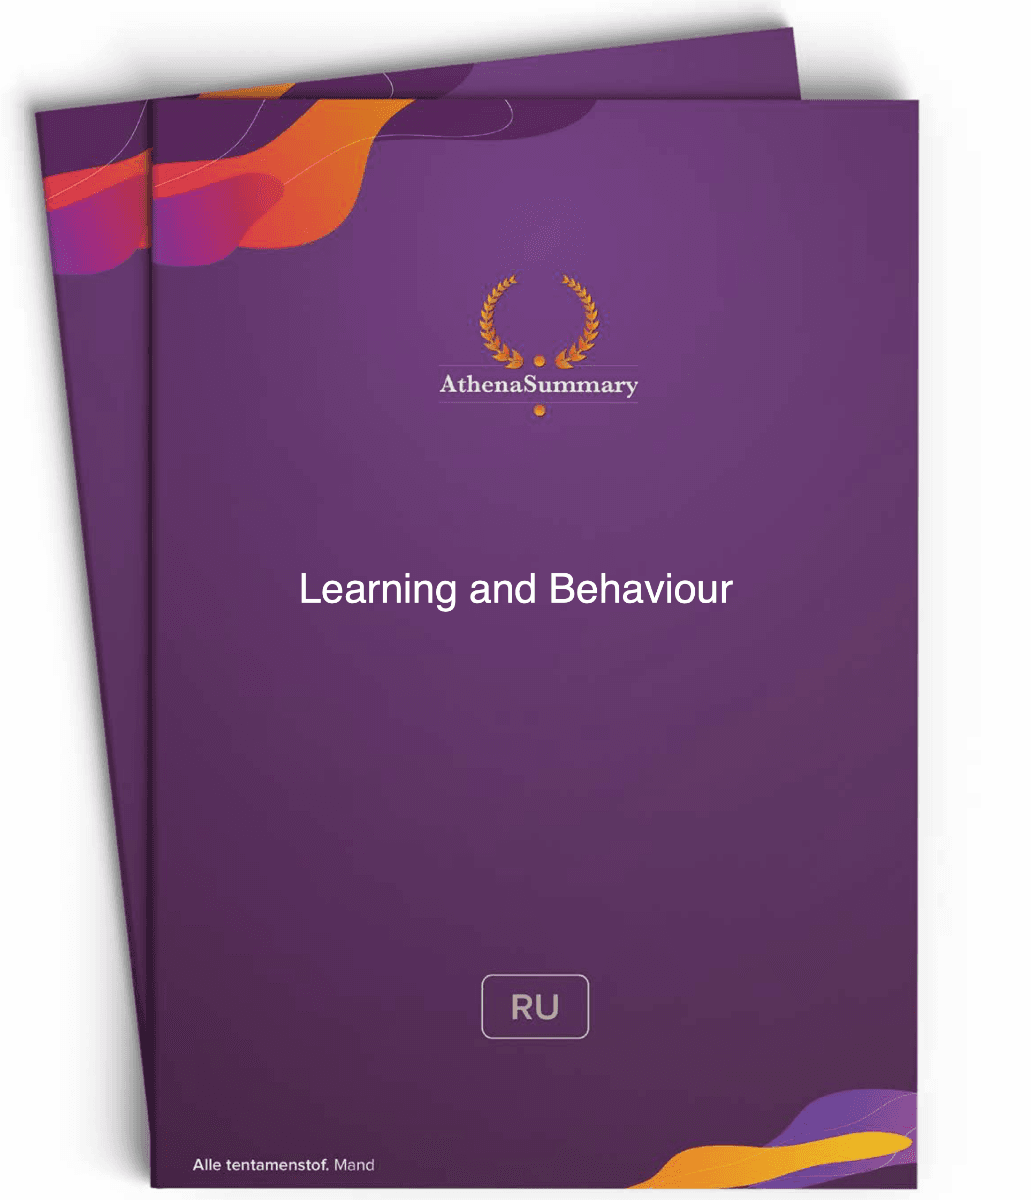 Literature Summary - Learning and Behaviour